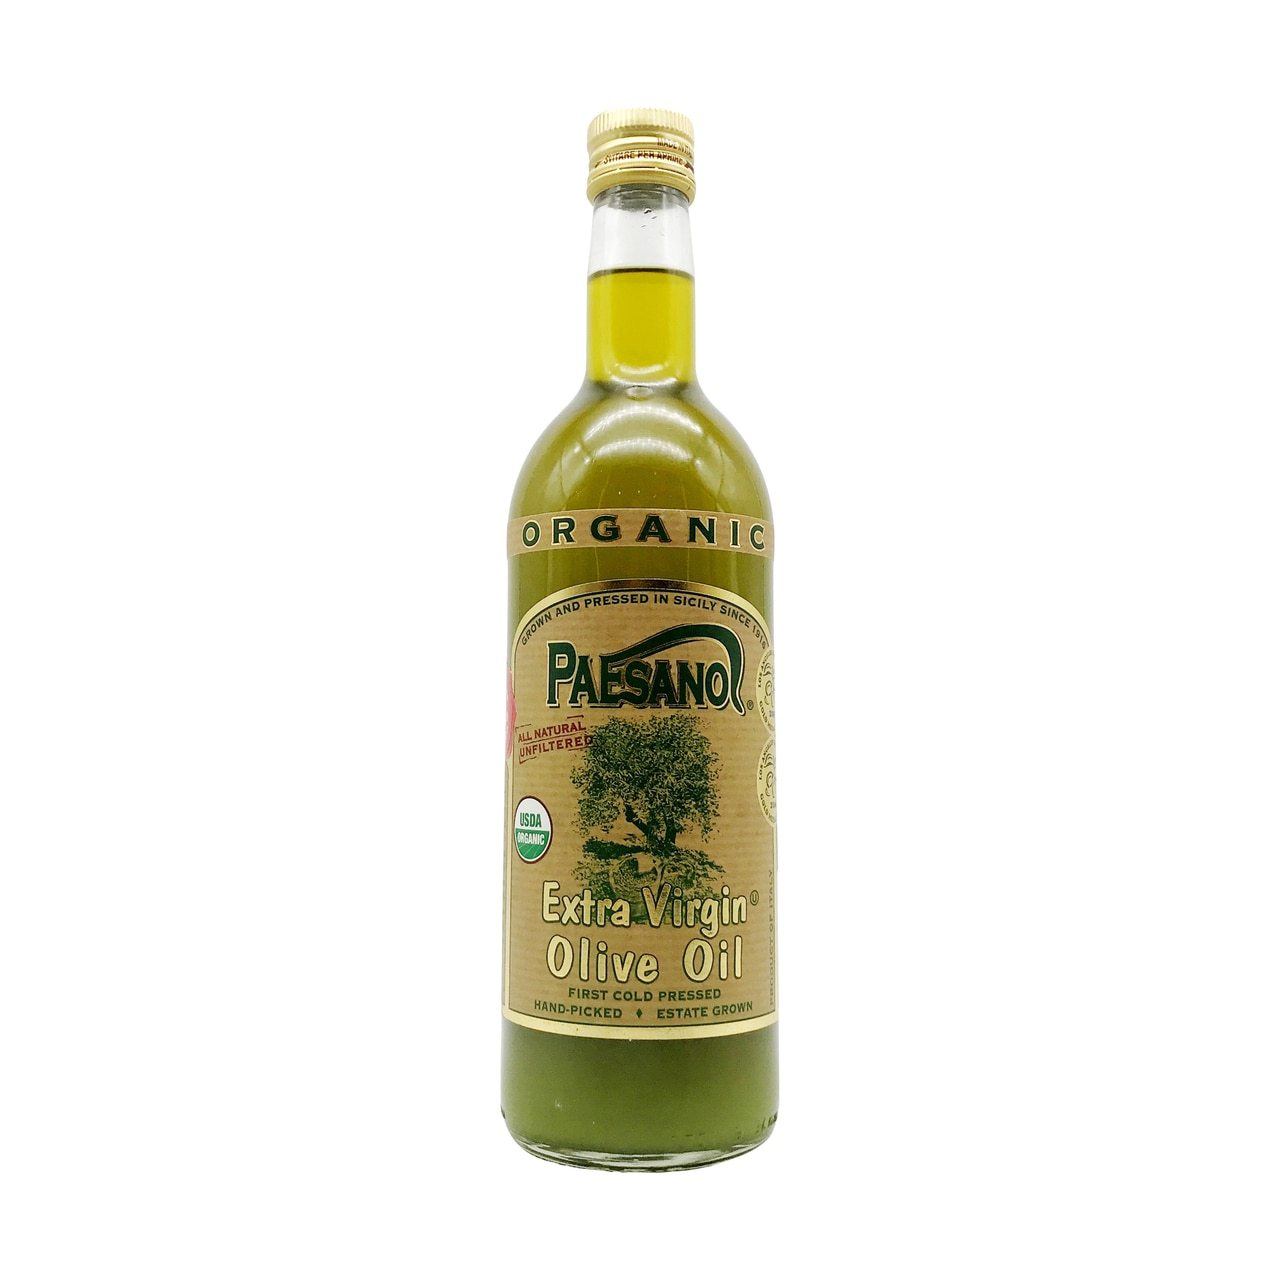  Pure Extra Virgin Olive Oil (25.4 Oz 750 ml) - Virgin Olive  Oil - Aceite de Oliva Extra Virgen, Premium, EVOO - Victor Guedes El  Gallo,Tradition Since 1919 by Serendipity